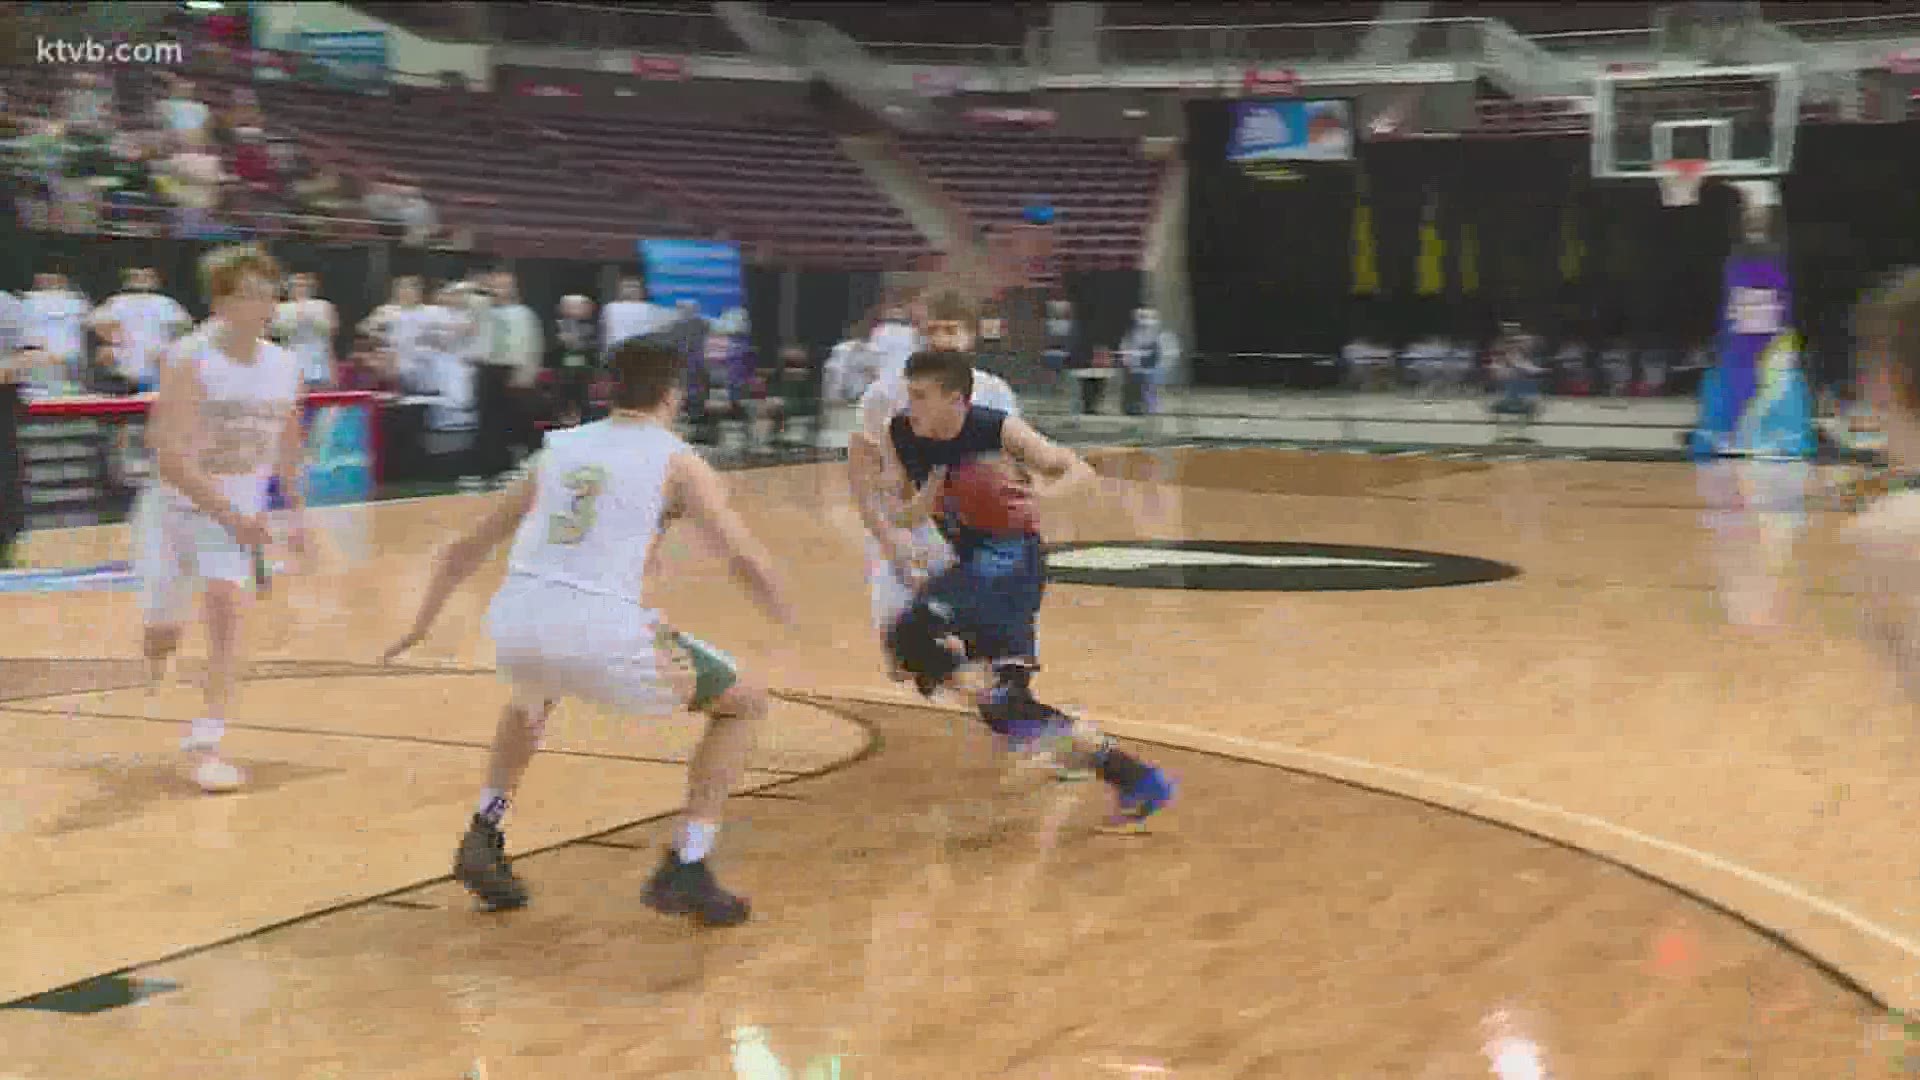 St. Maries hangs on in a thriller in 2A state title game on Saturday, 51-50 the final score.